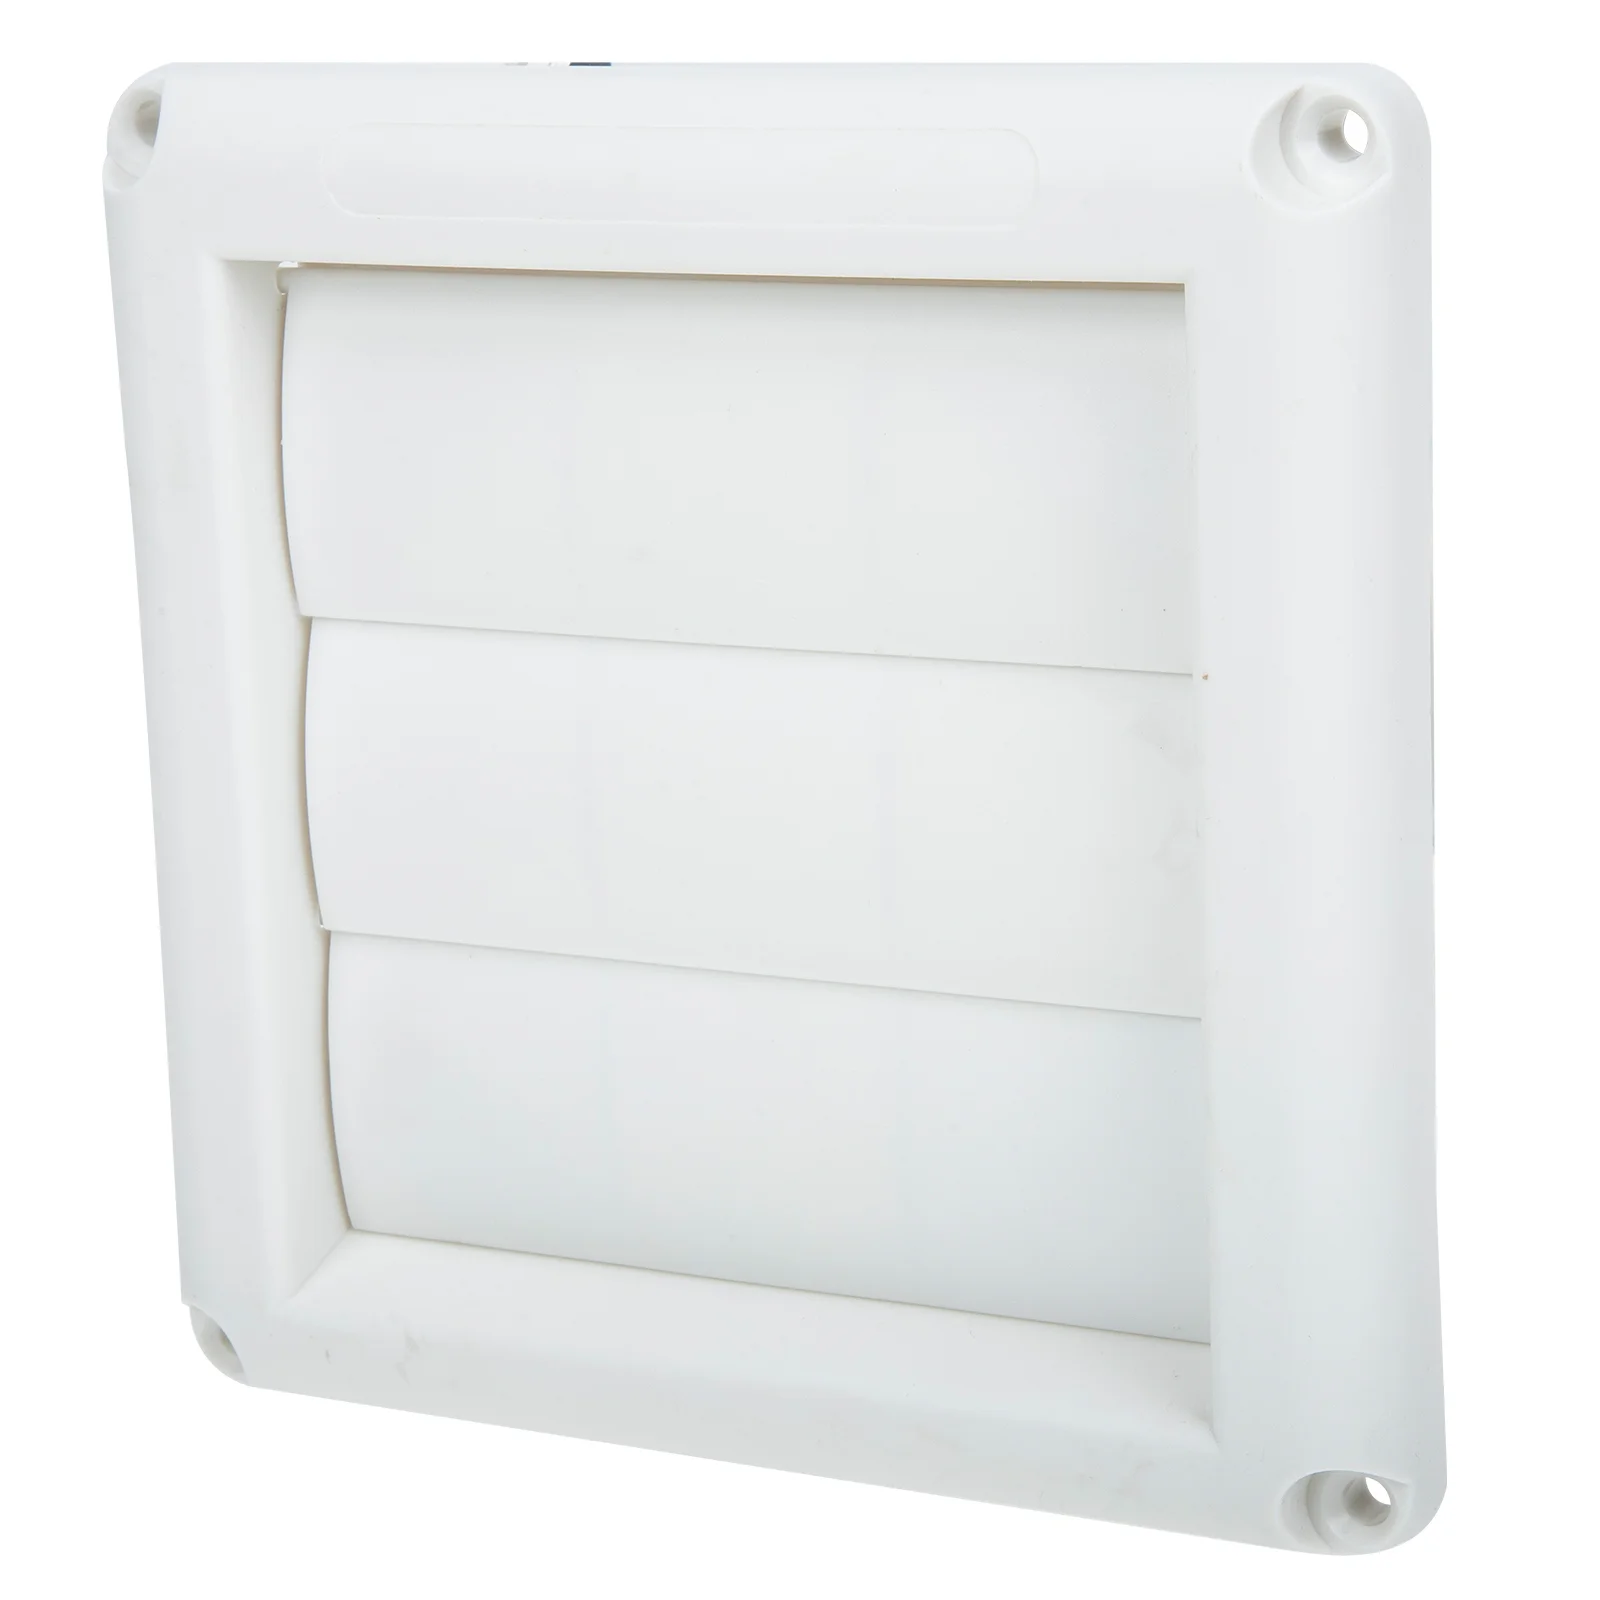 

Air Vent for Exterior Wall Louvered Cover Motorized Motorized Electric Blinds Outlet Airflow Plastic Wardrobe